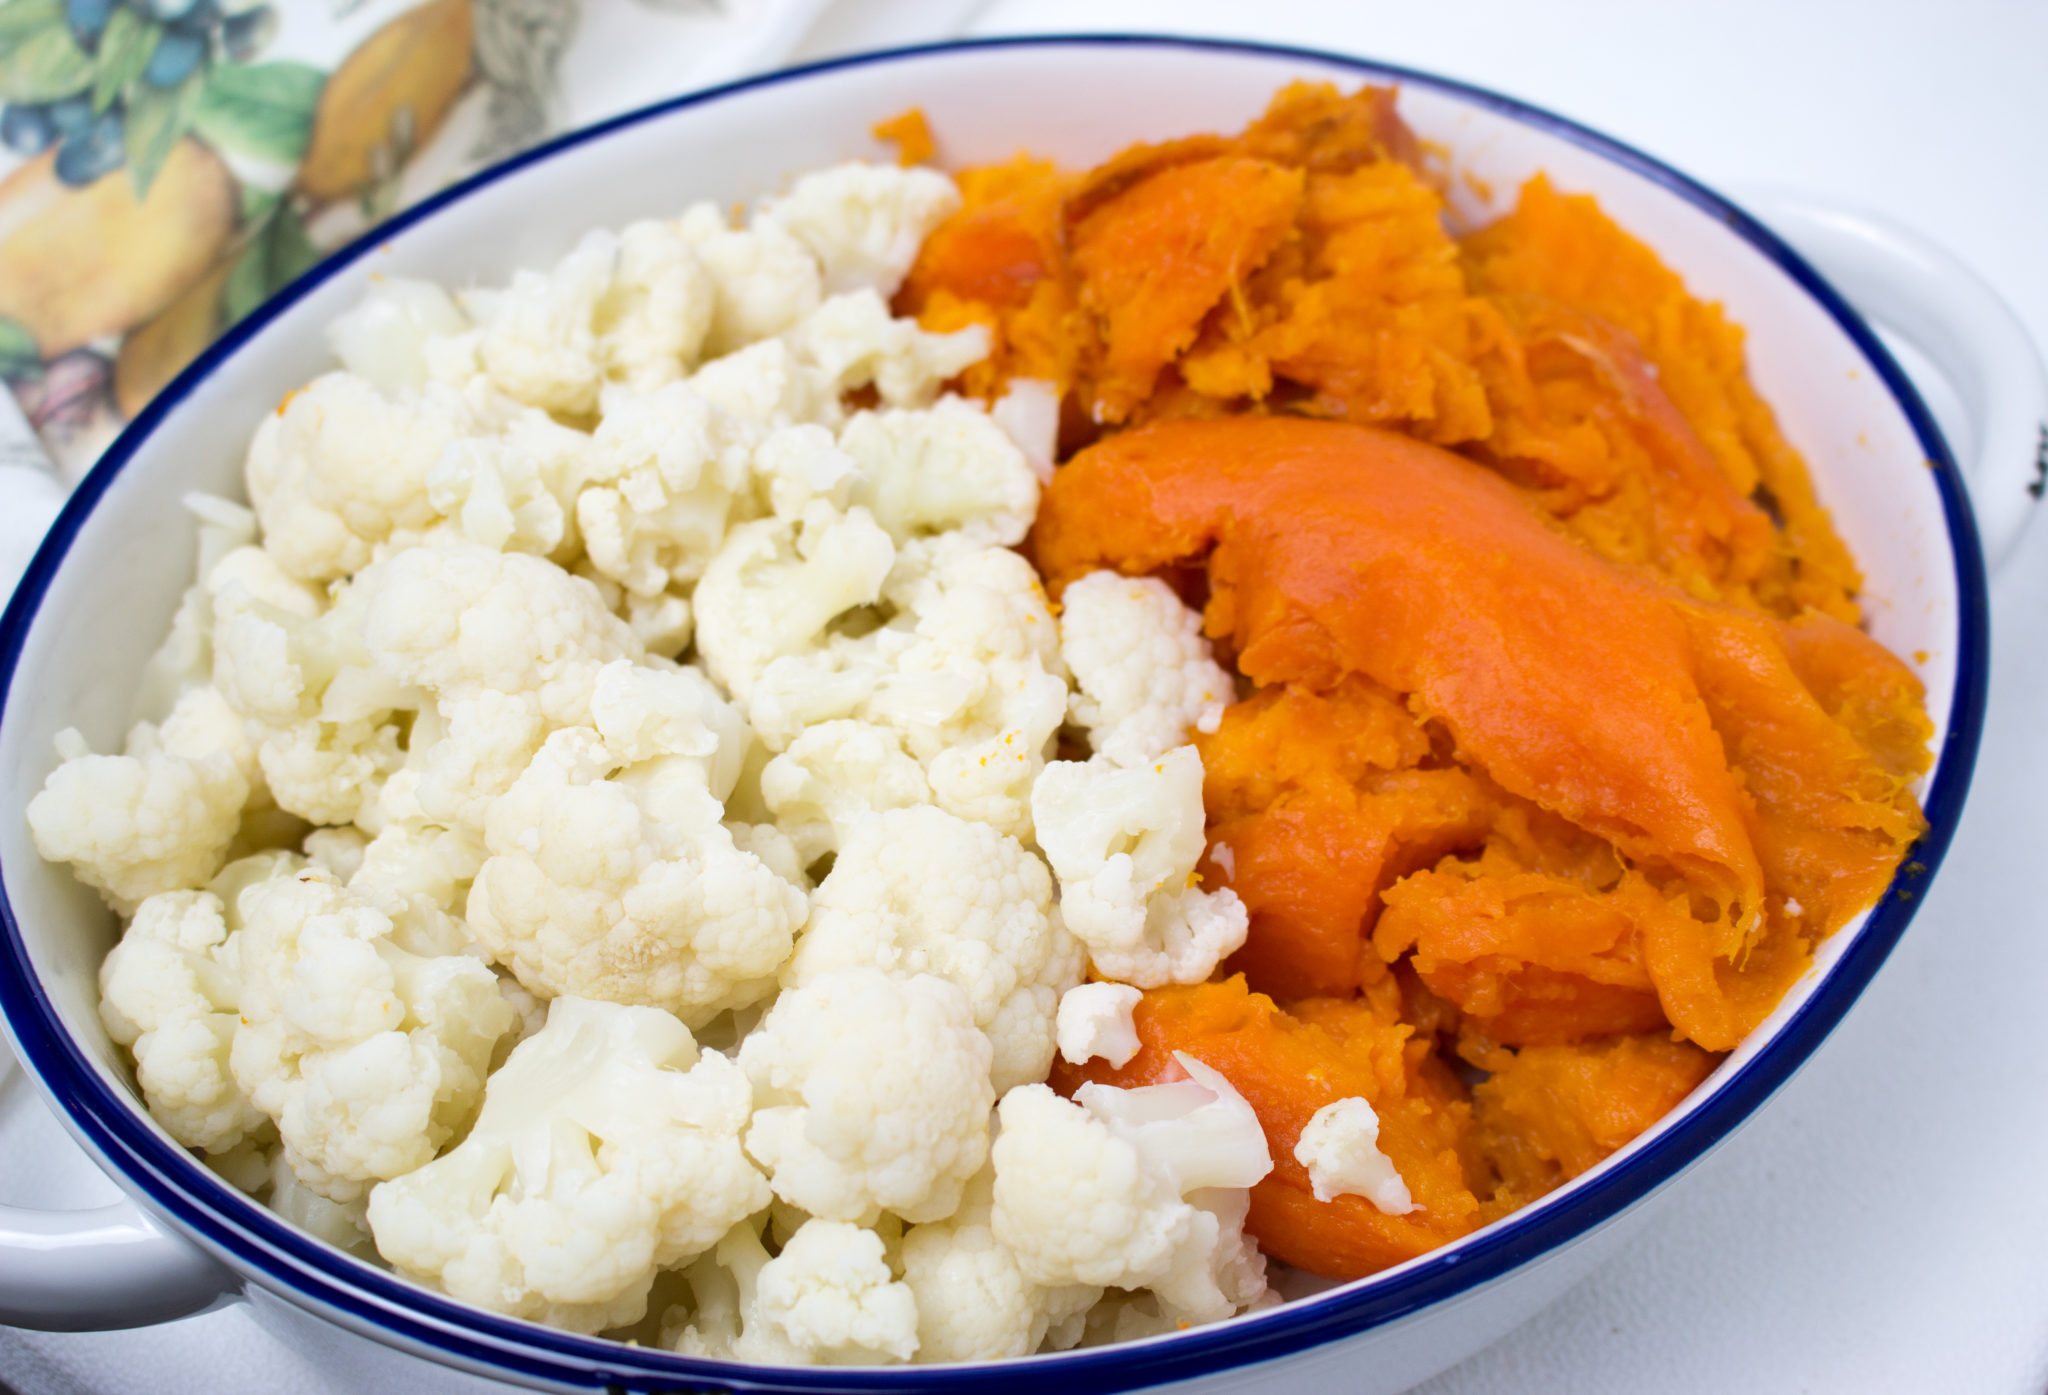 Sweet potatoes and cauliflower combined to create an amazingly smooth and savory side mashed potato recipe. No more marshmallows or added sweet flavorings. Roasting the sweet potatoes produces all the sweetness needed to make this side dish memorable. veganglutenfreelife.com/sweet-potato-cauliflower-mash/